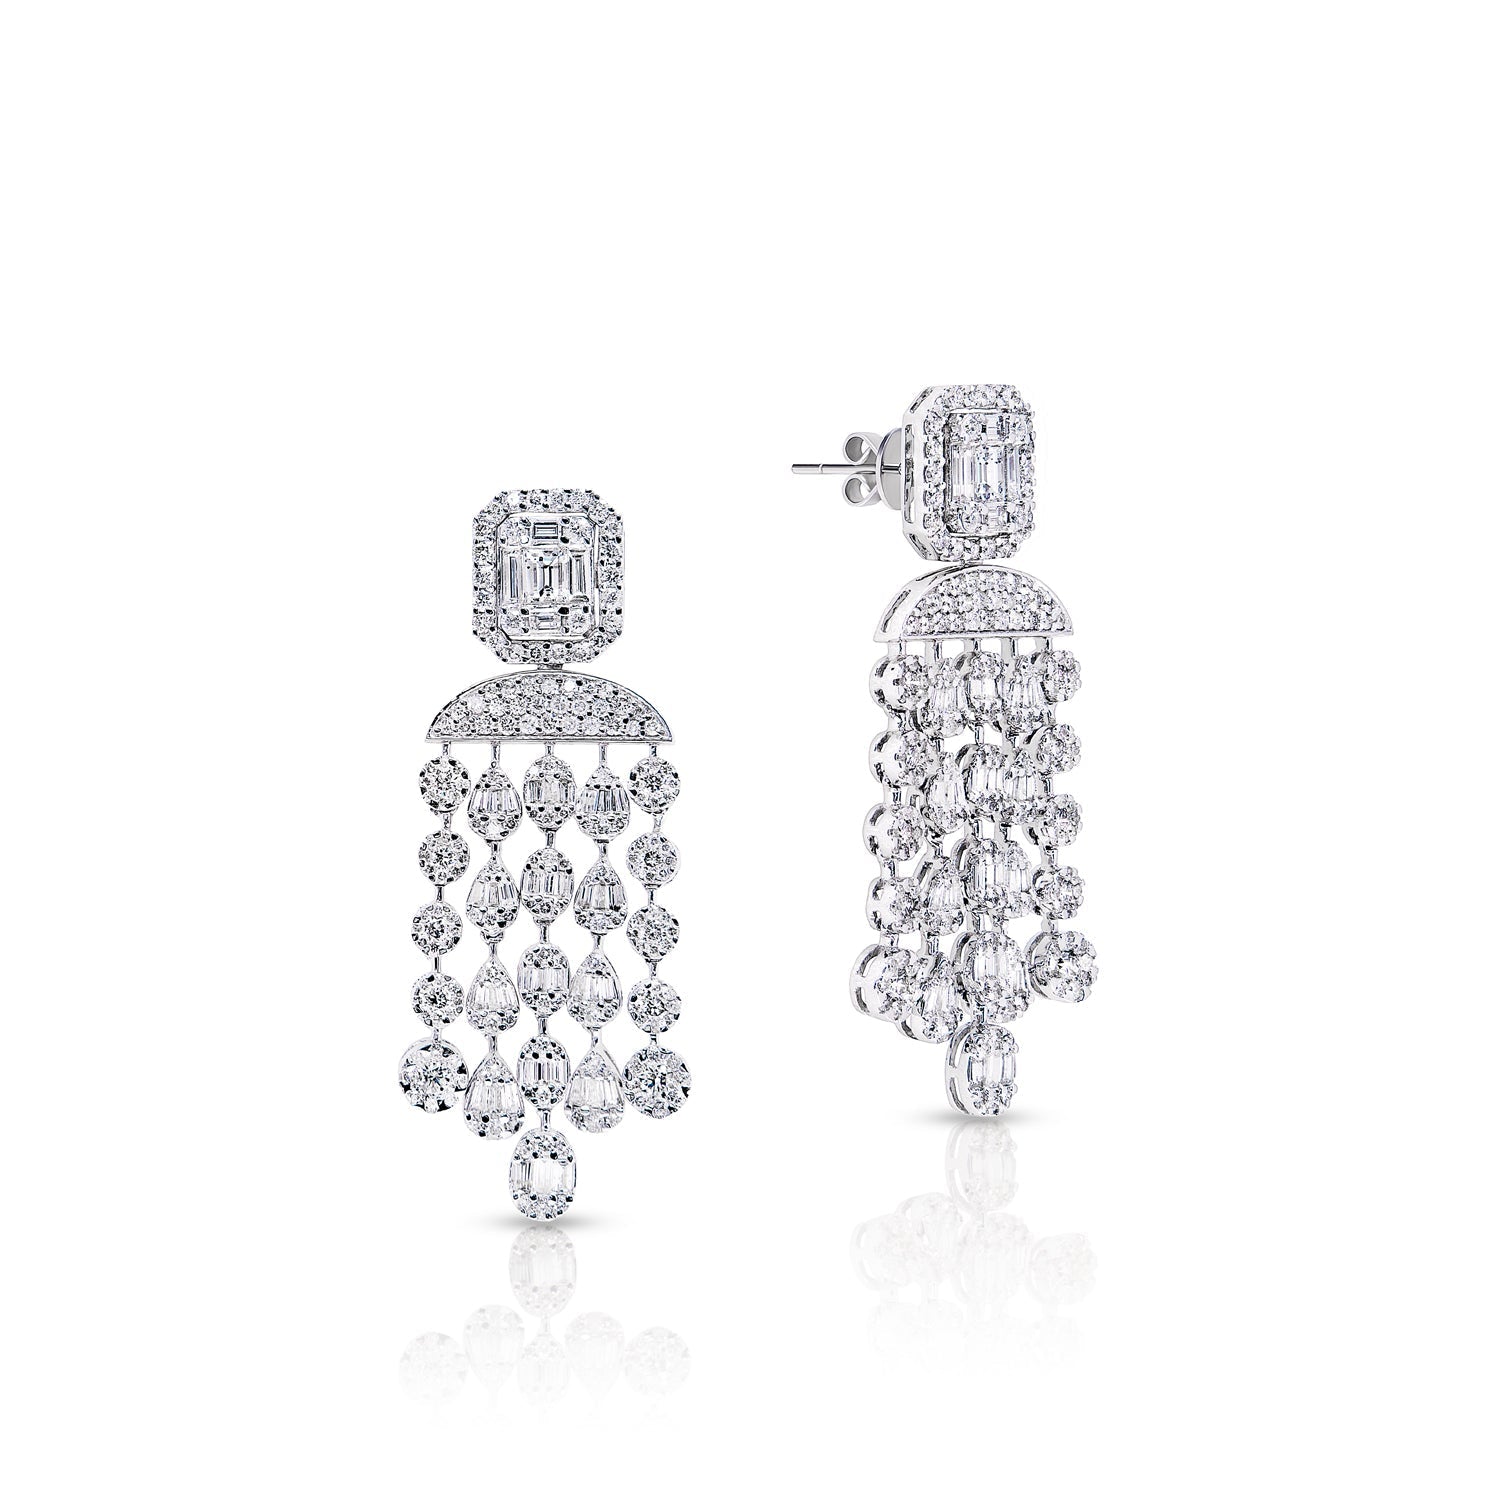 Fallon 5 Carat Combine Mix Shape Diamond Hanging Earrings in 14k White Gold Front and Side View